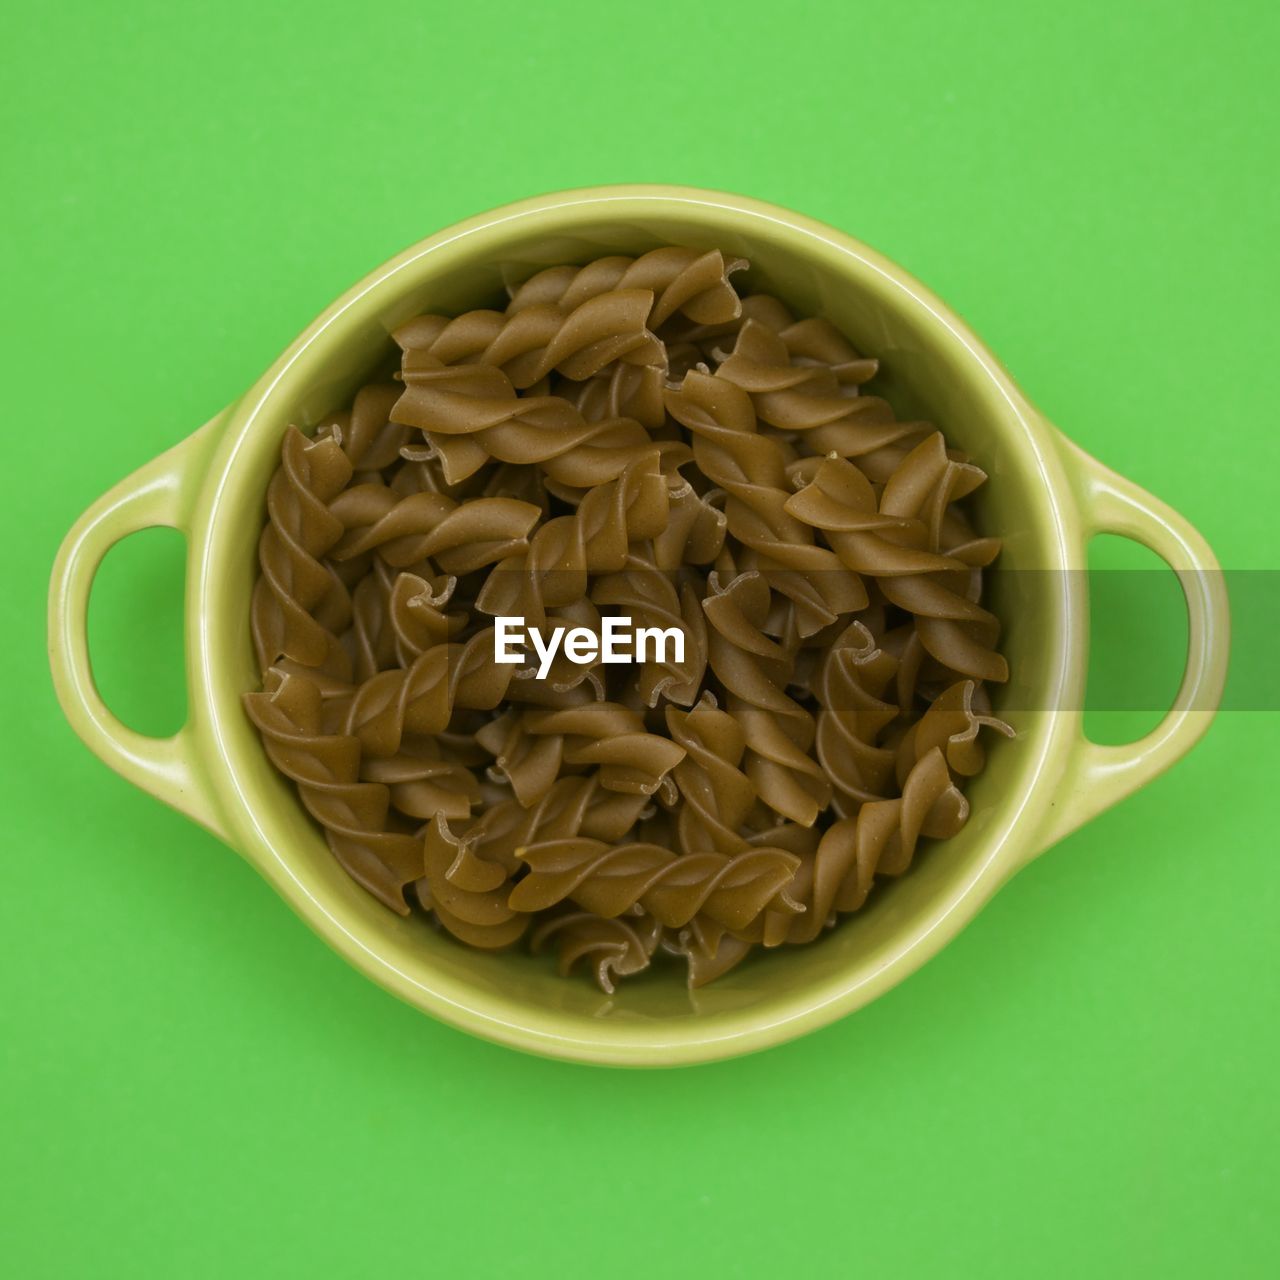 Green fusilli pasta in a green bowl on green background